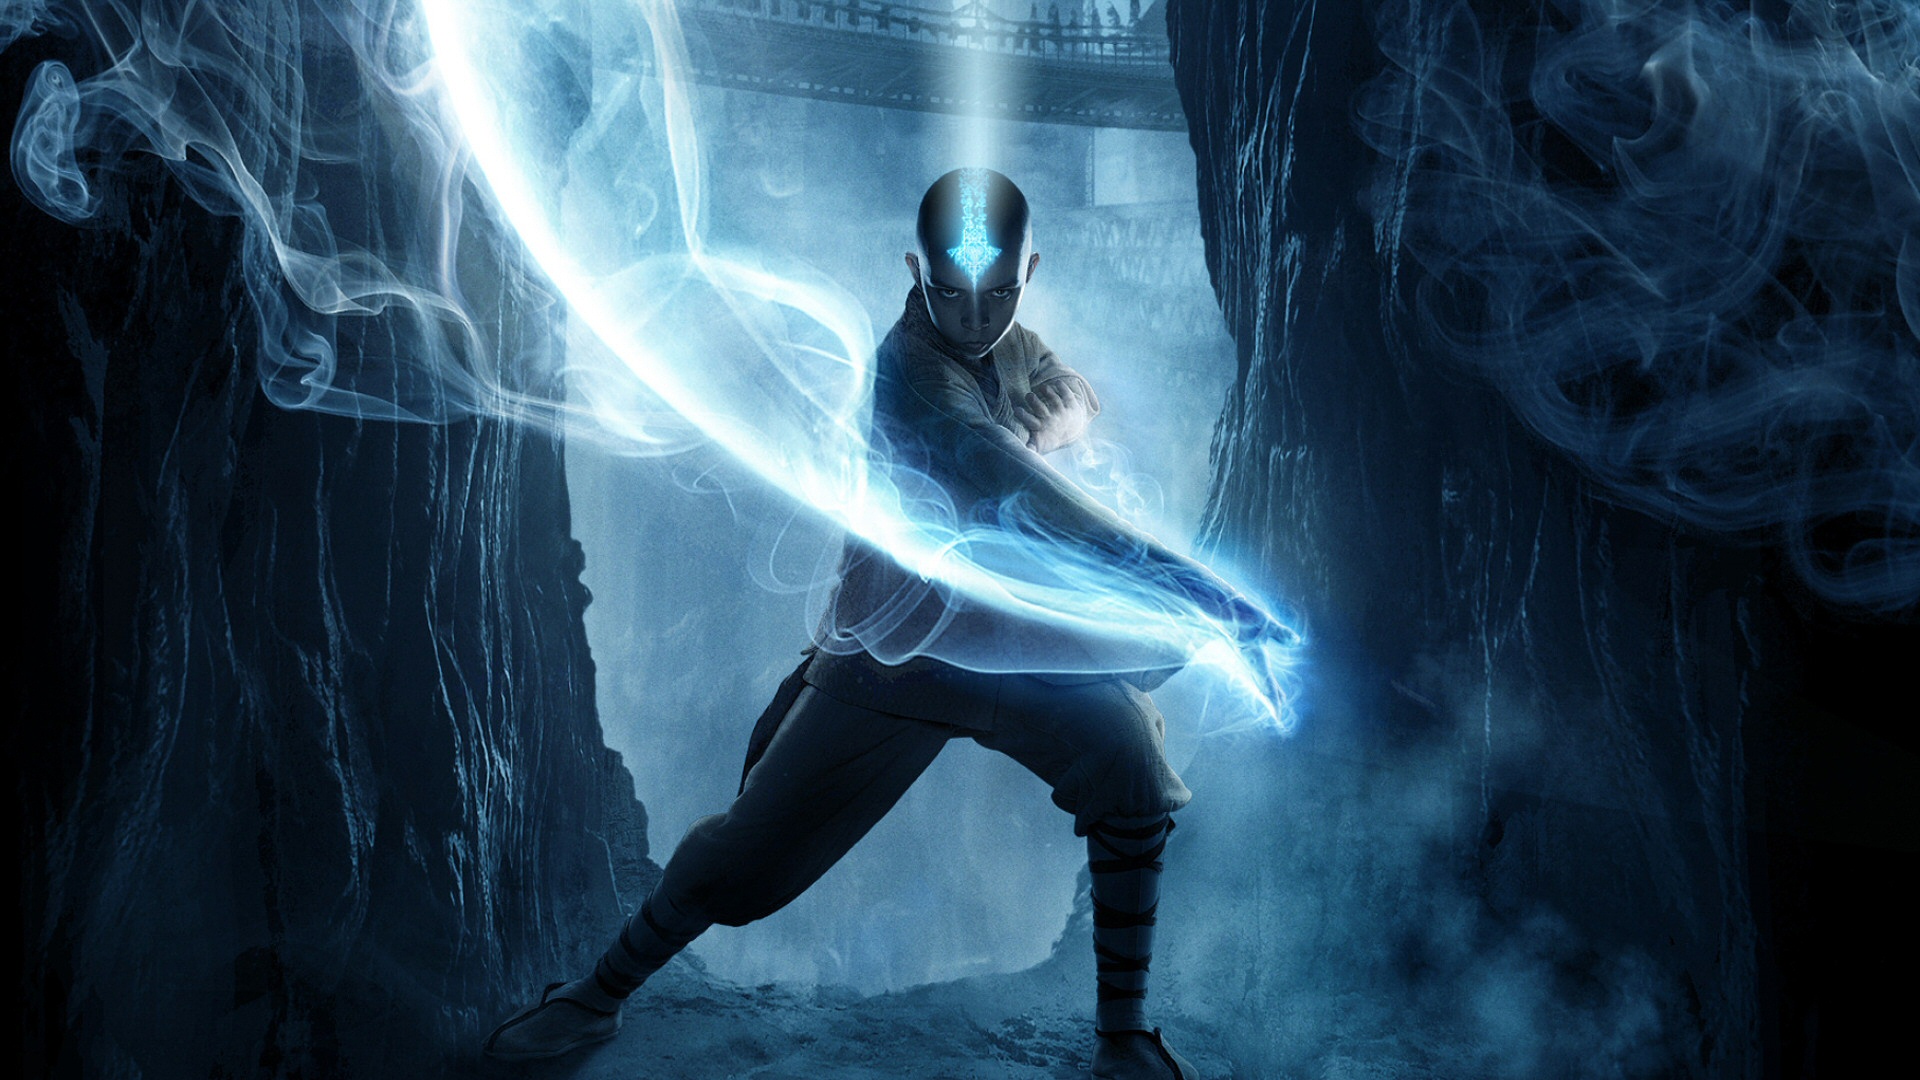  Avatar the last Airbender Wallpaper for Download